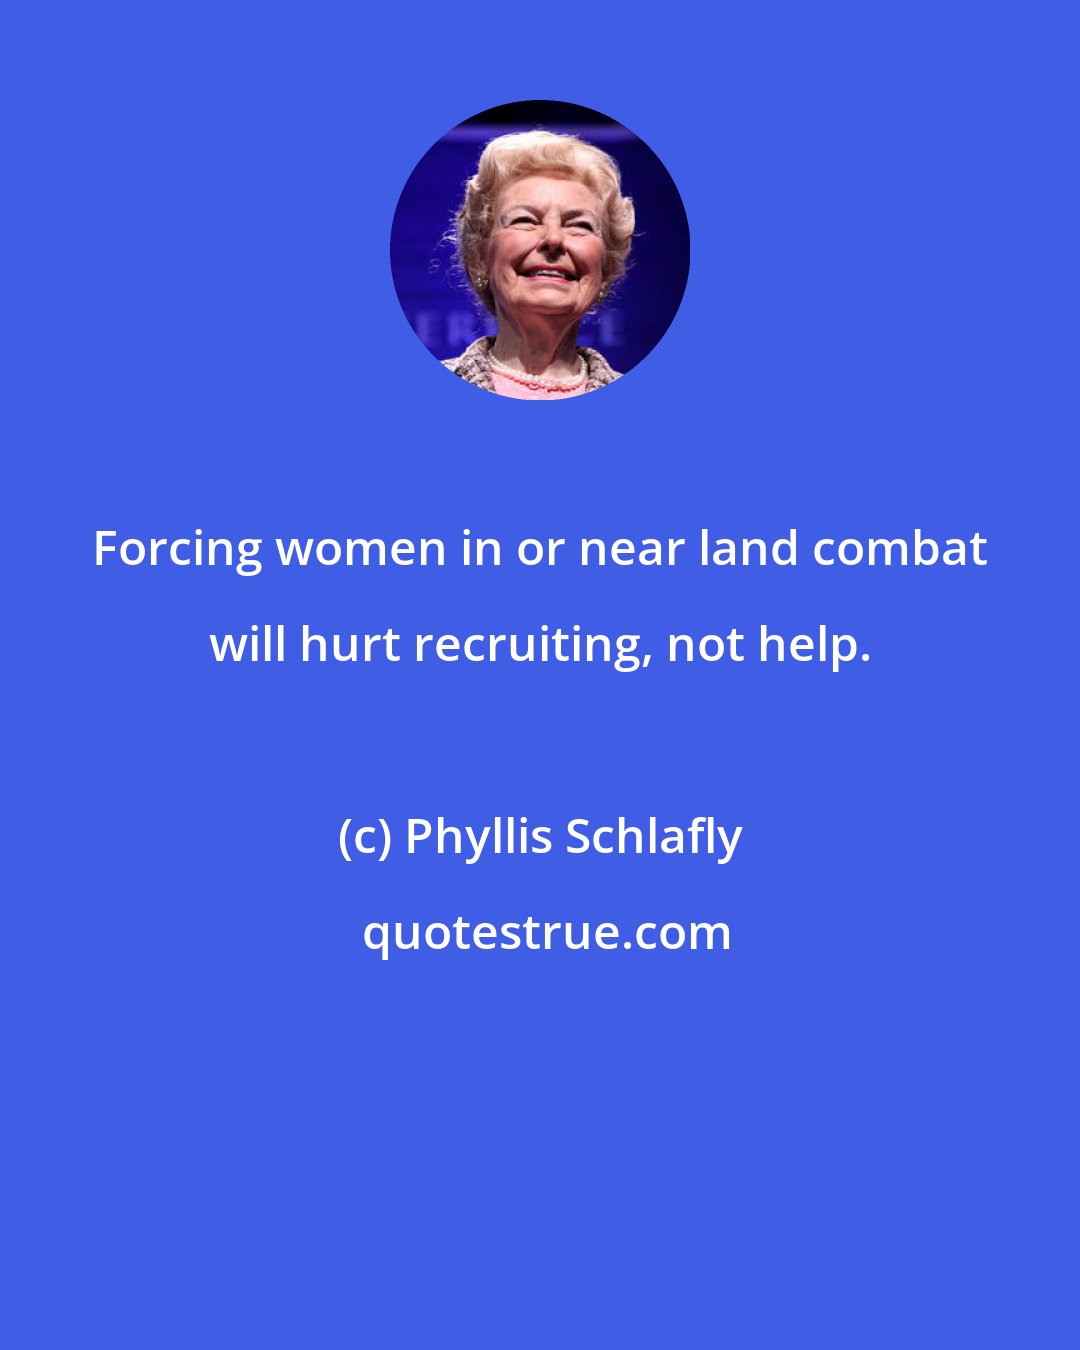 Phyllis Schlafly: Forcing women in or near land combat will hurt recruiting, not help.